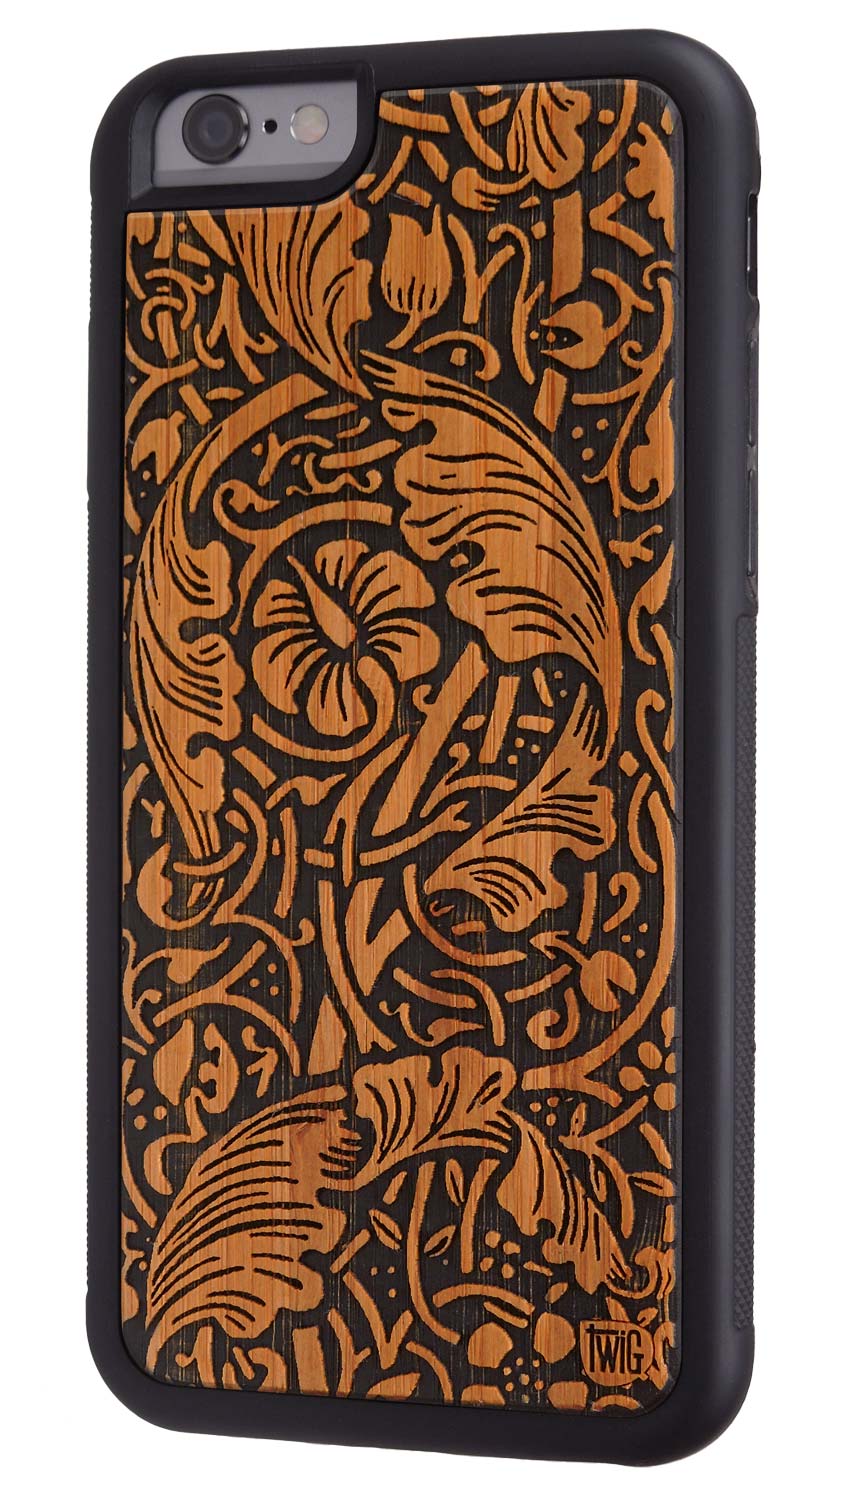 Vines - Bamboo iPhone Case, iPhone Case - Twig Case Co.